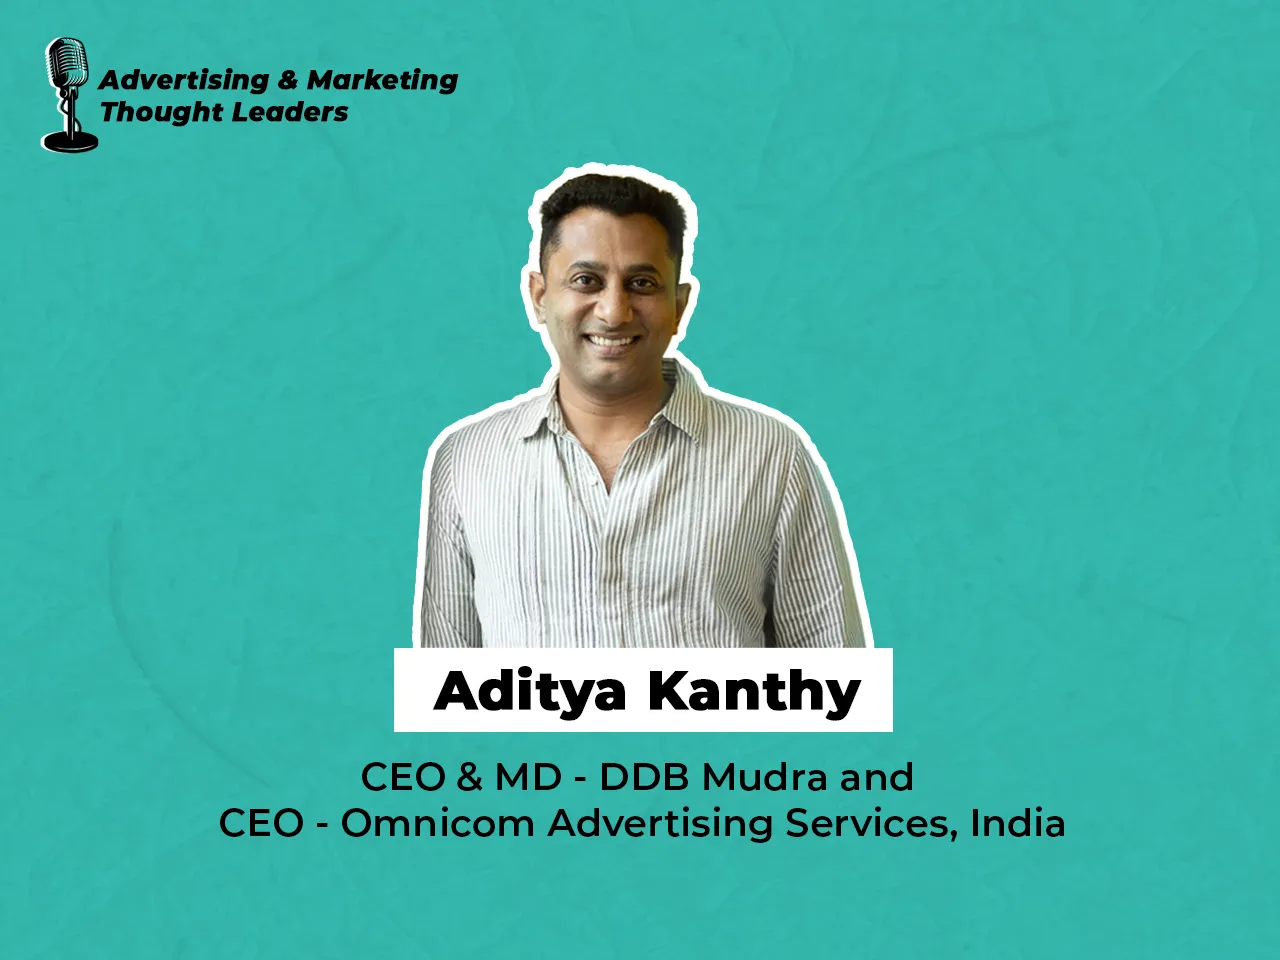 It's crucial to establish a clear connection between the growth of the company and its employees: Aditya Kanthy